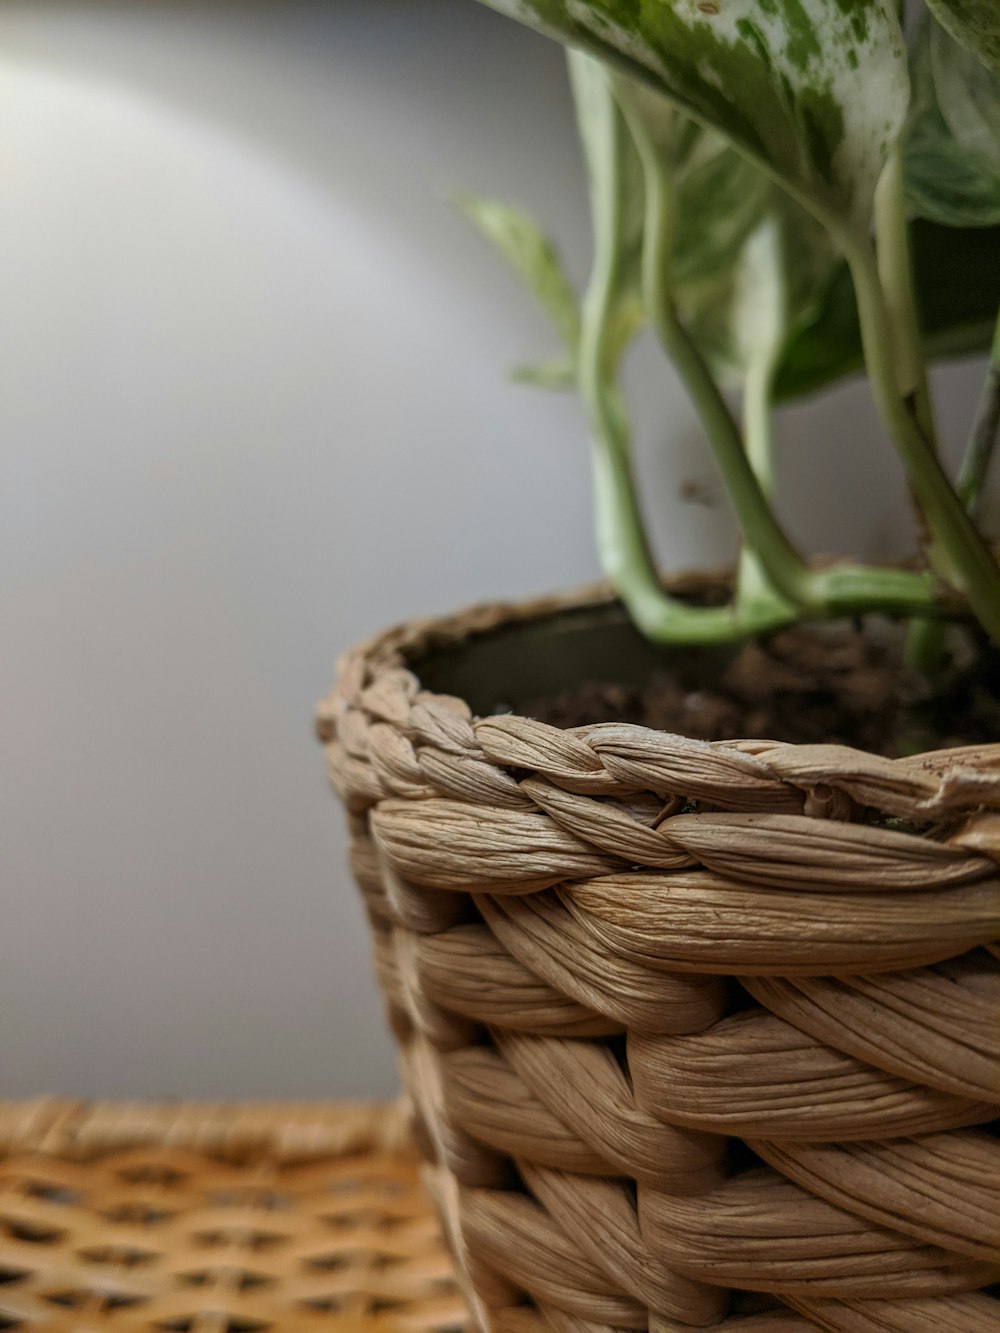 green plant in brown woven basket